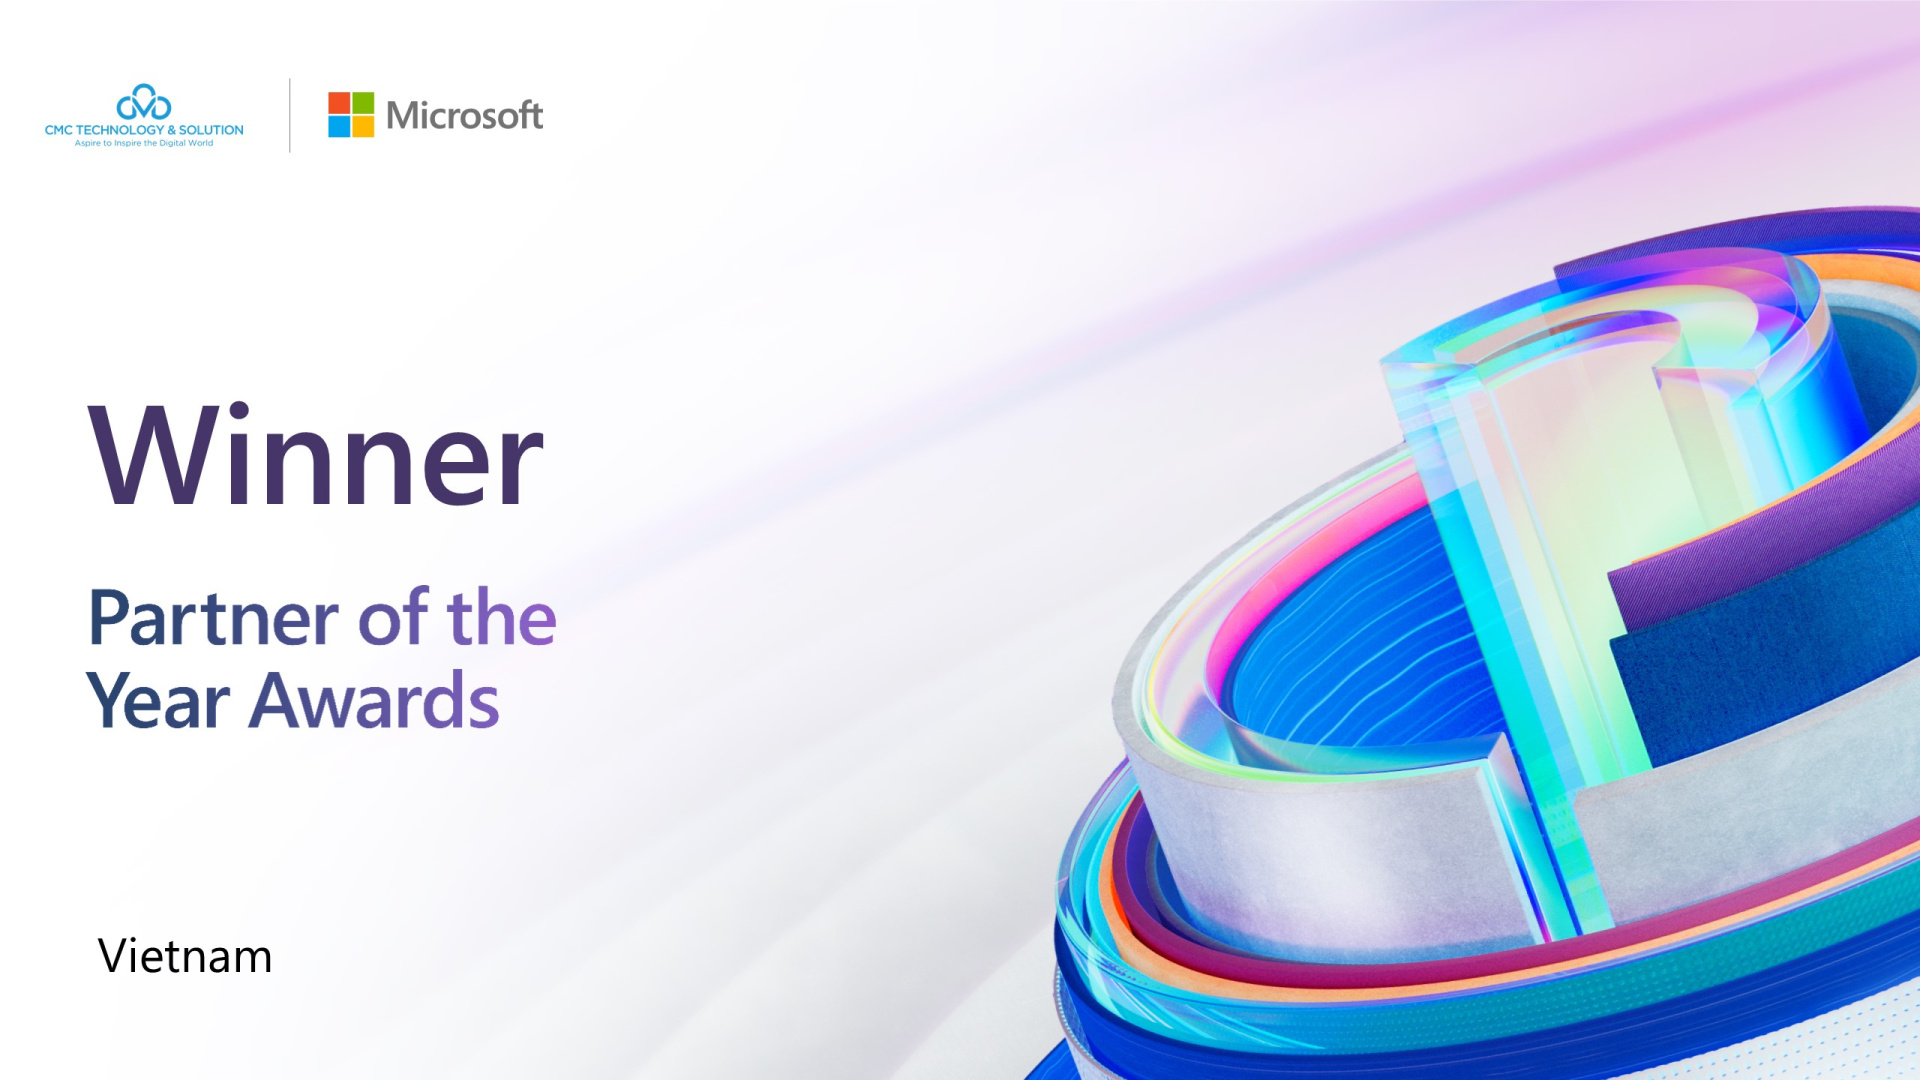 CMC TS is the winner of Microsoft Partner of the Year Awards 2023